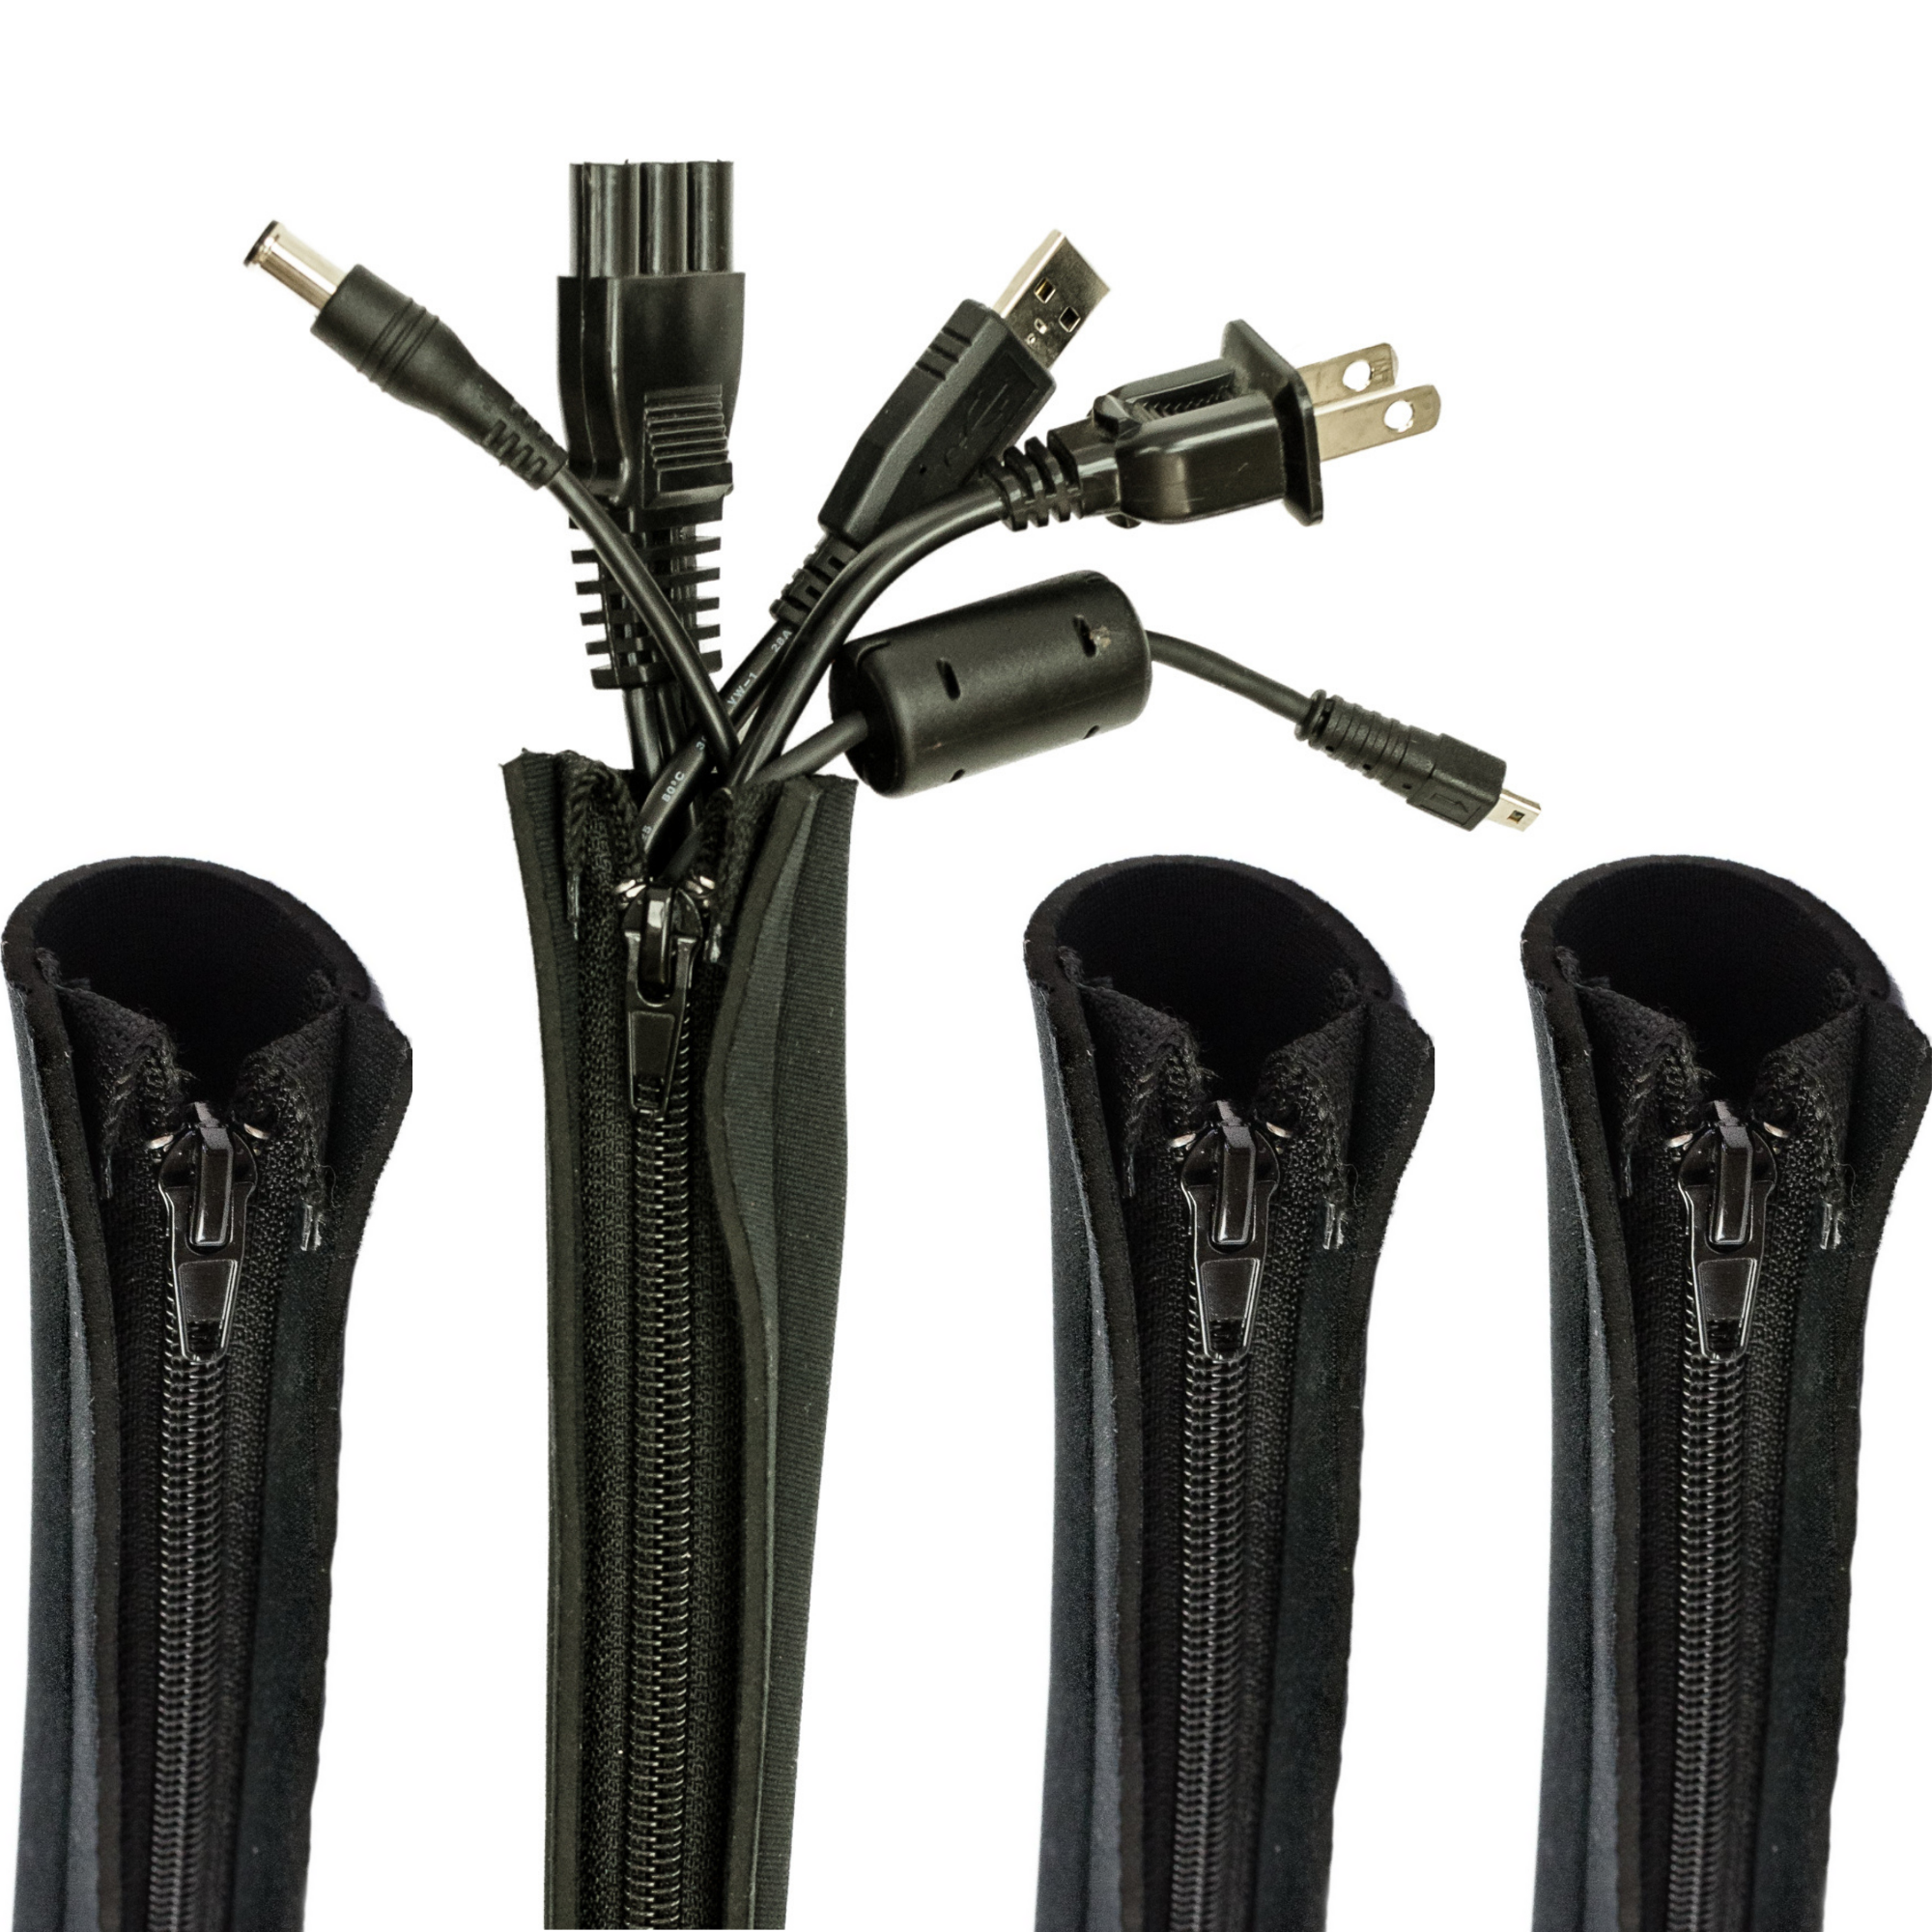 Cable Sleeves-Cord Management-Wire Organizer-Wrap,Hider,Cover-4 Sleeves-Best for Home,Office